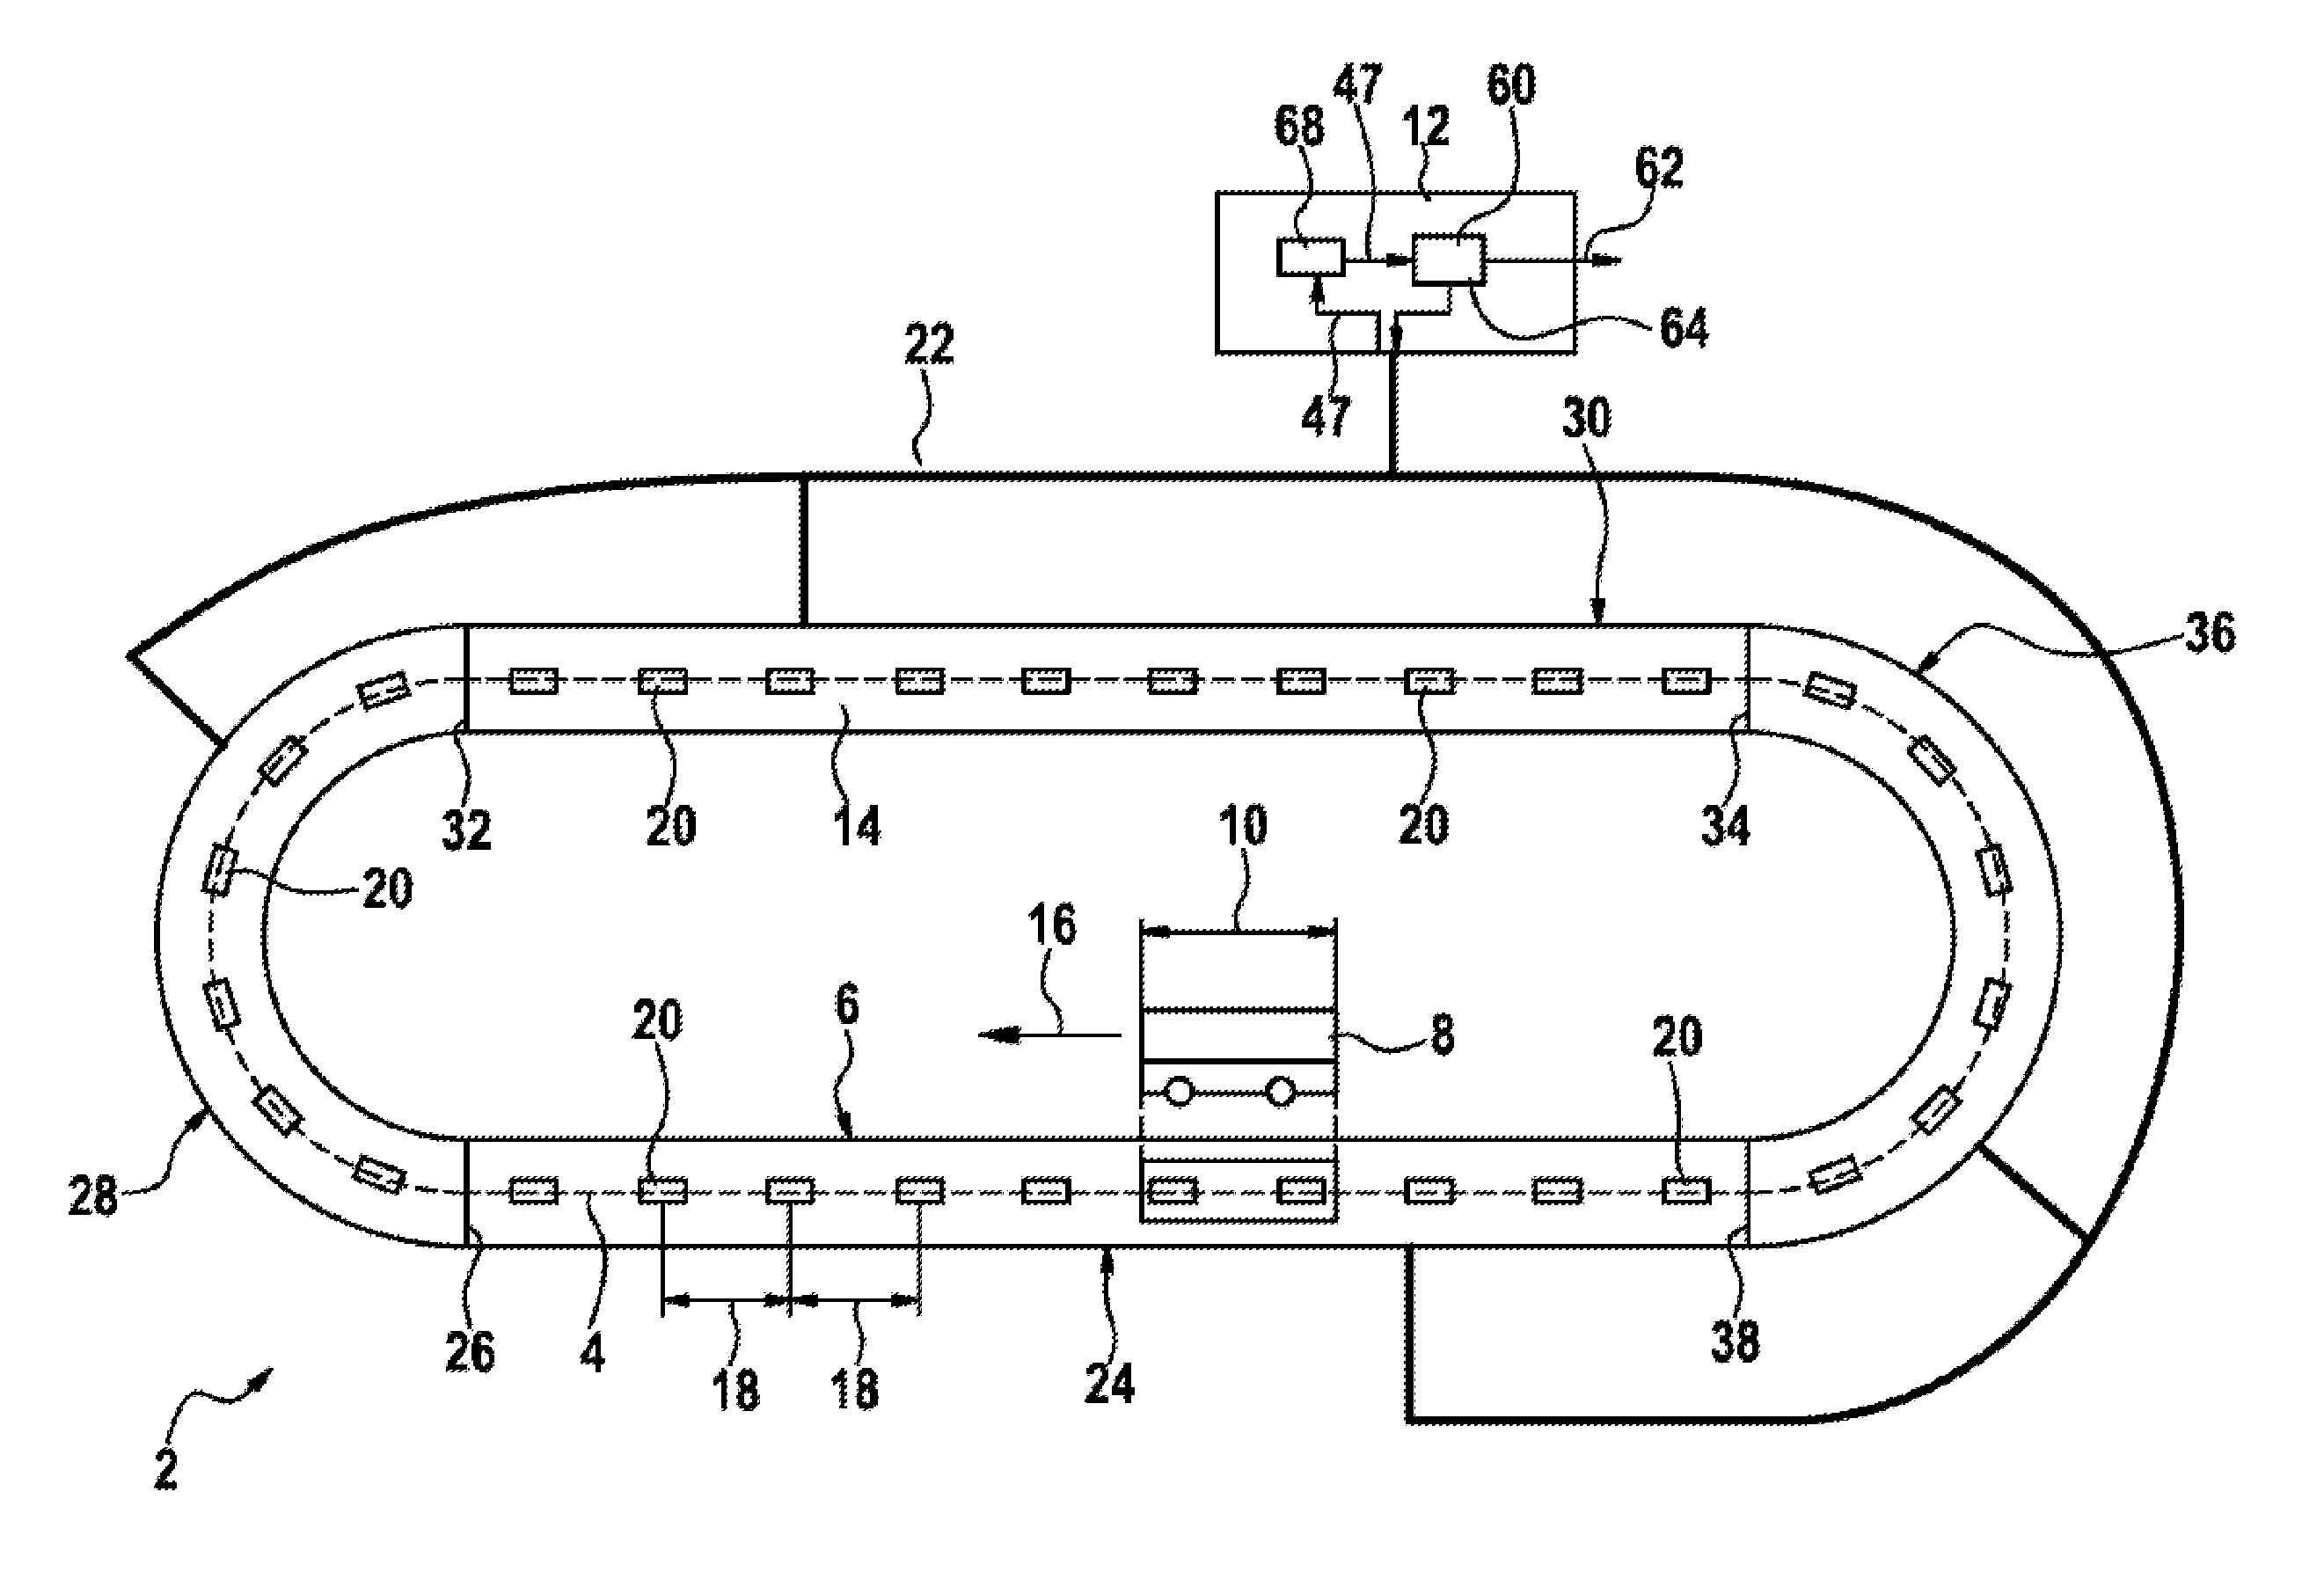 Incremental multi-position detection system for a revolving electromagnetic transfer system